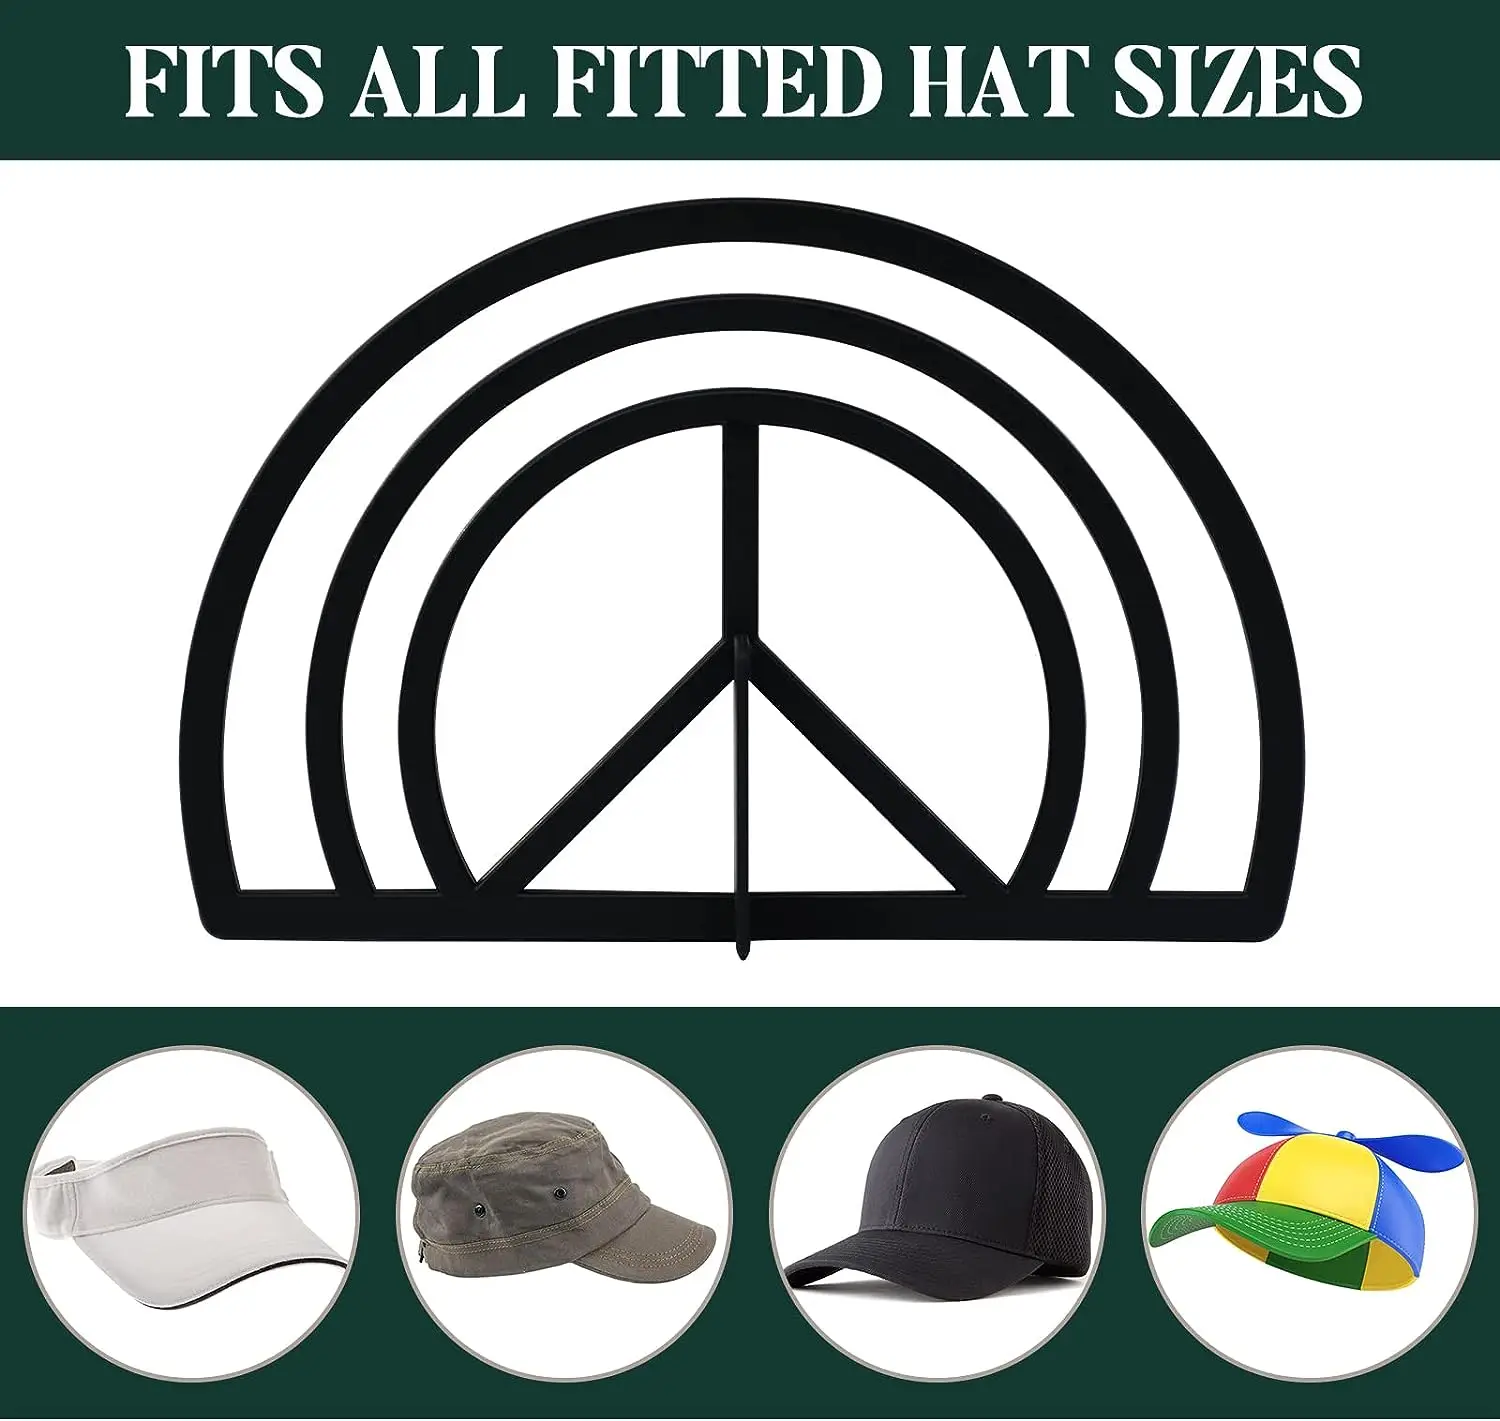 Hat Brim Bender 4-Pack Hat Curving Band Hat Shaper with Two Curve Options  No Steaming Required Convinent for All Types of Hats - AliExpress